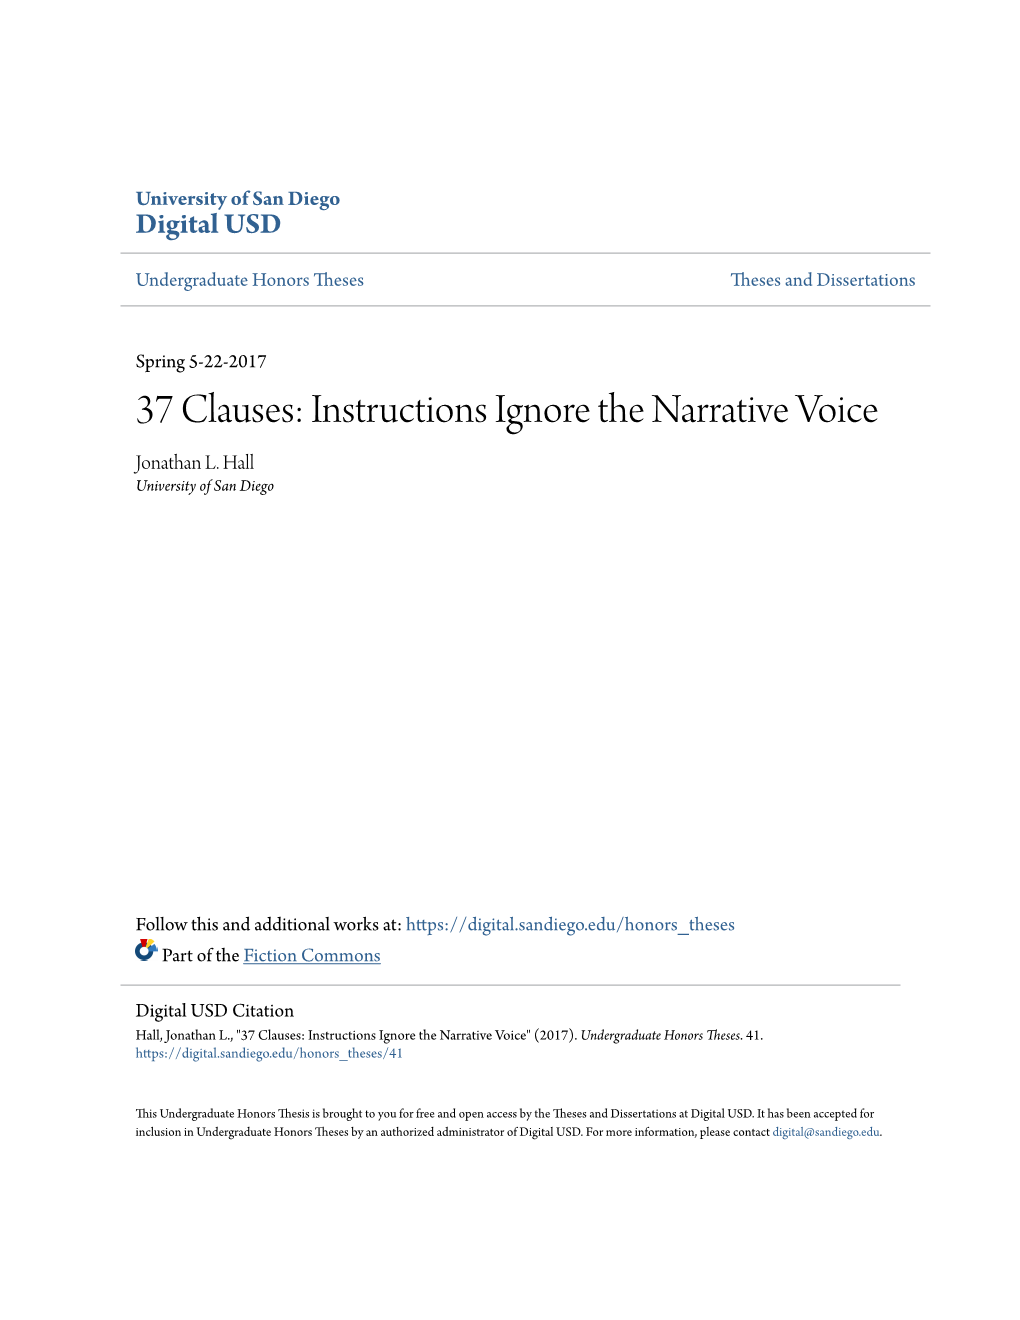 37 Clauses: Instructions Ignore the Narrative Voice Jonathan L